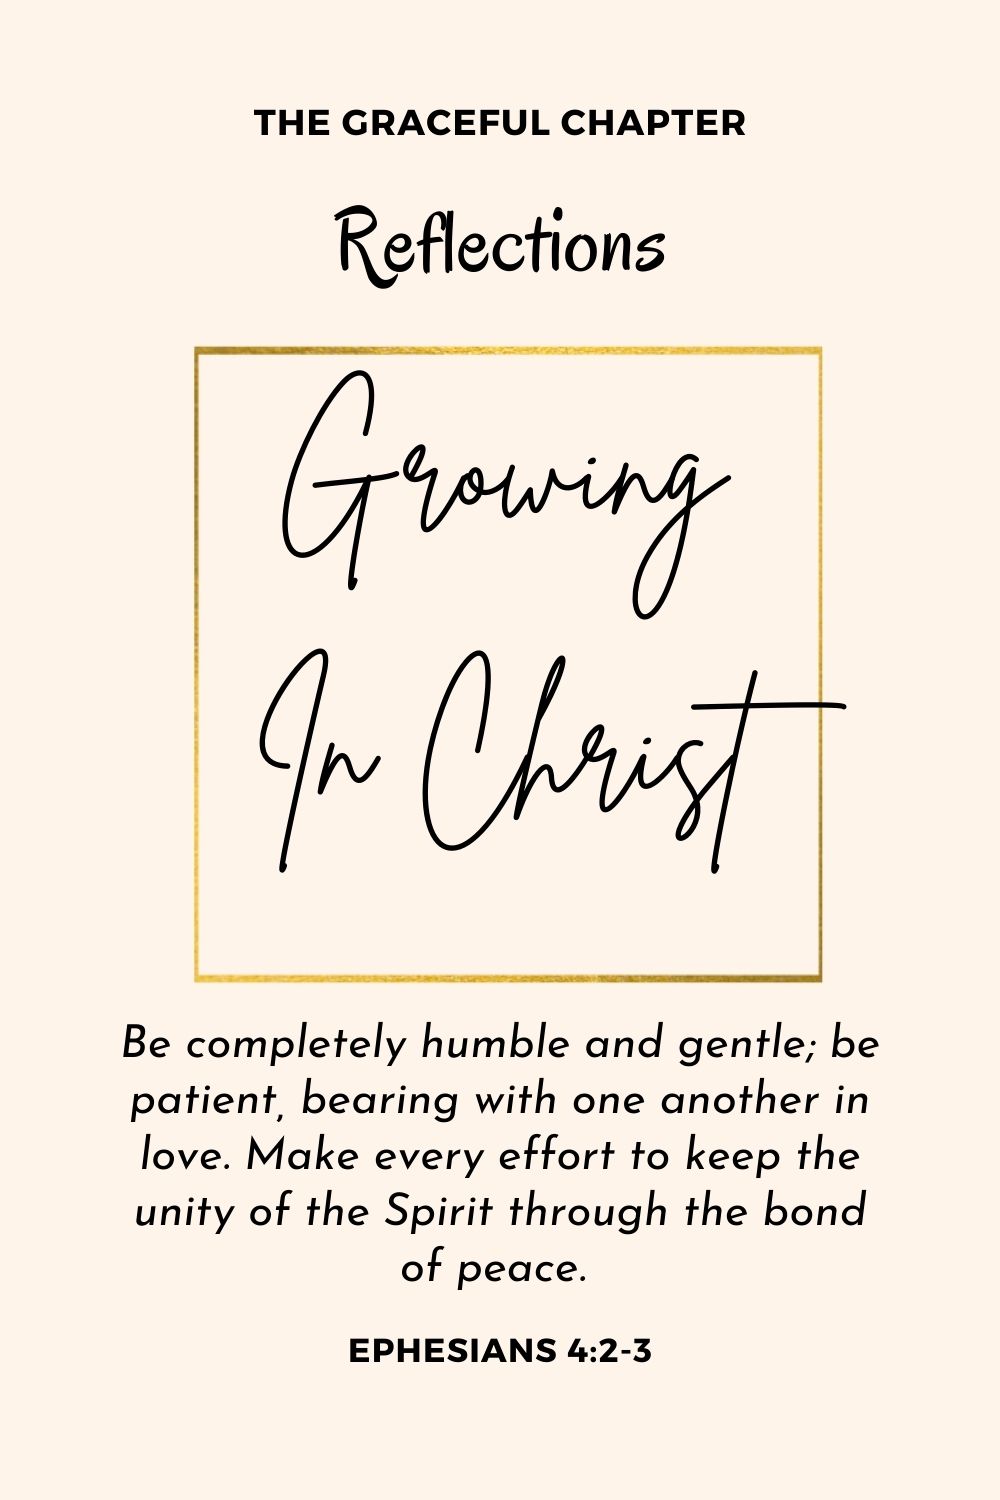 Reflection - Ephesians 4:2-7 - Growing in Christ